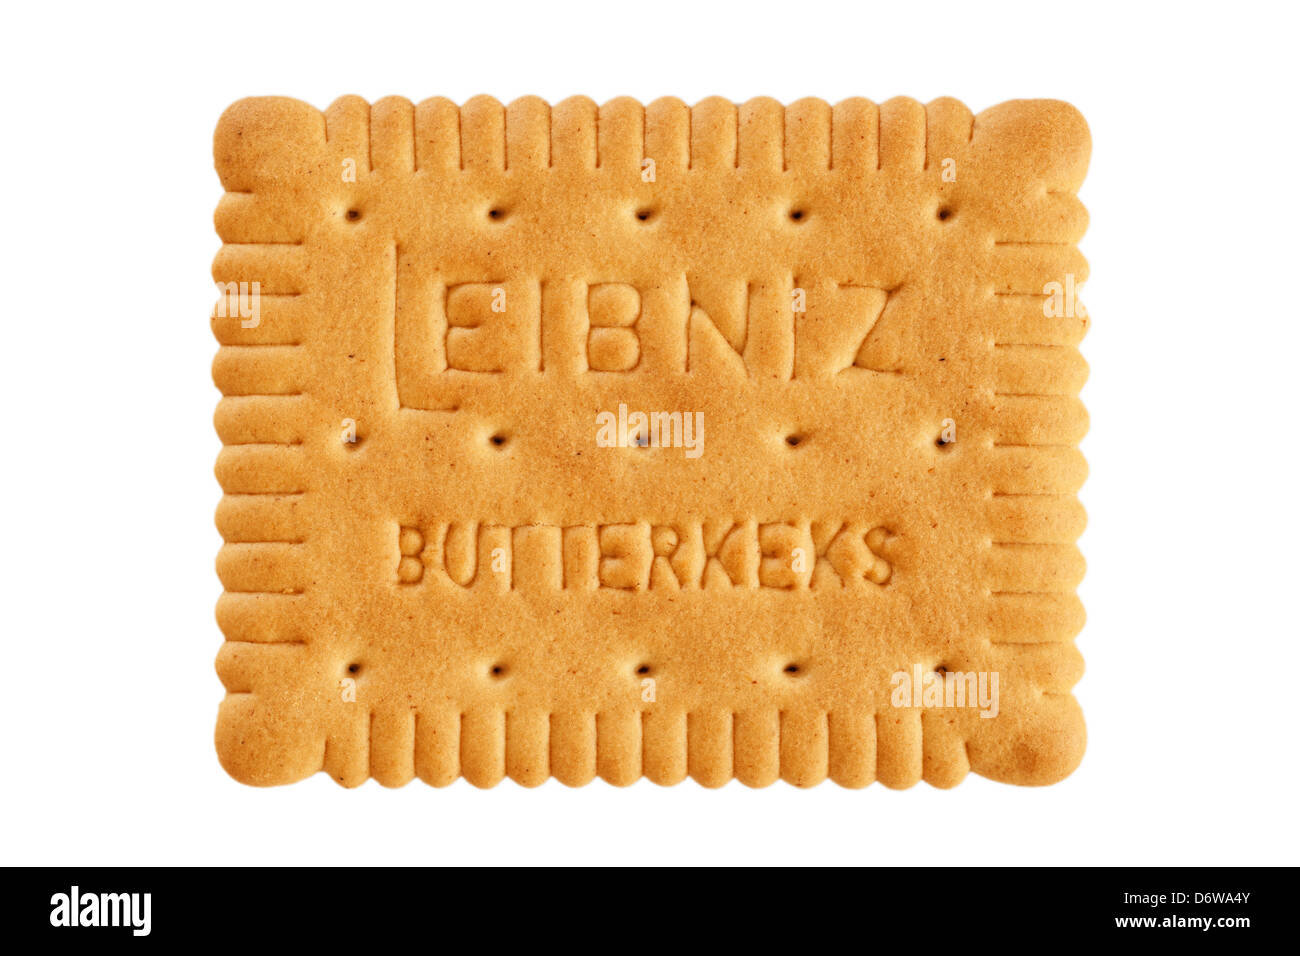 A Leibniz butter biscuit on a white background Stock Photo